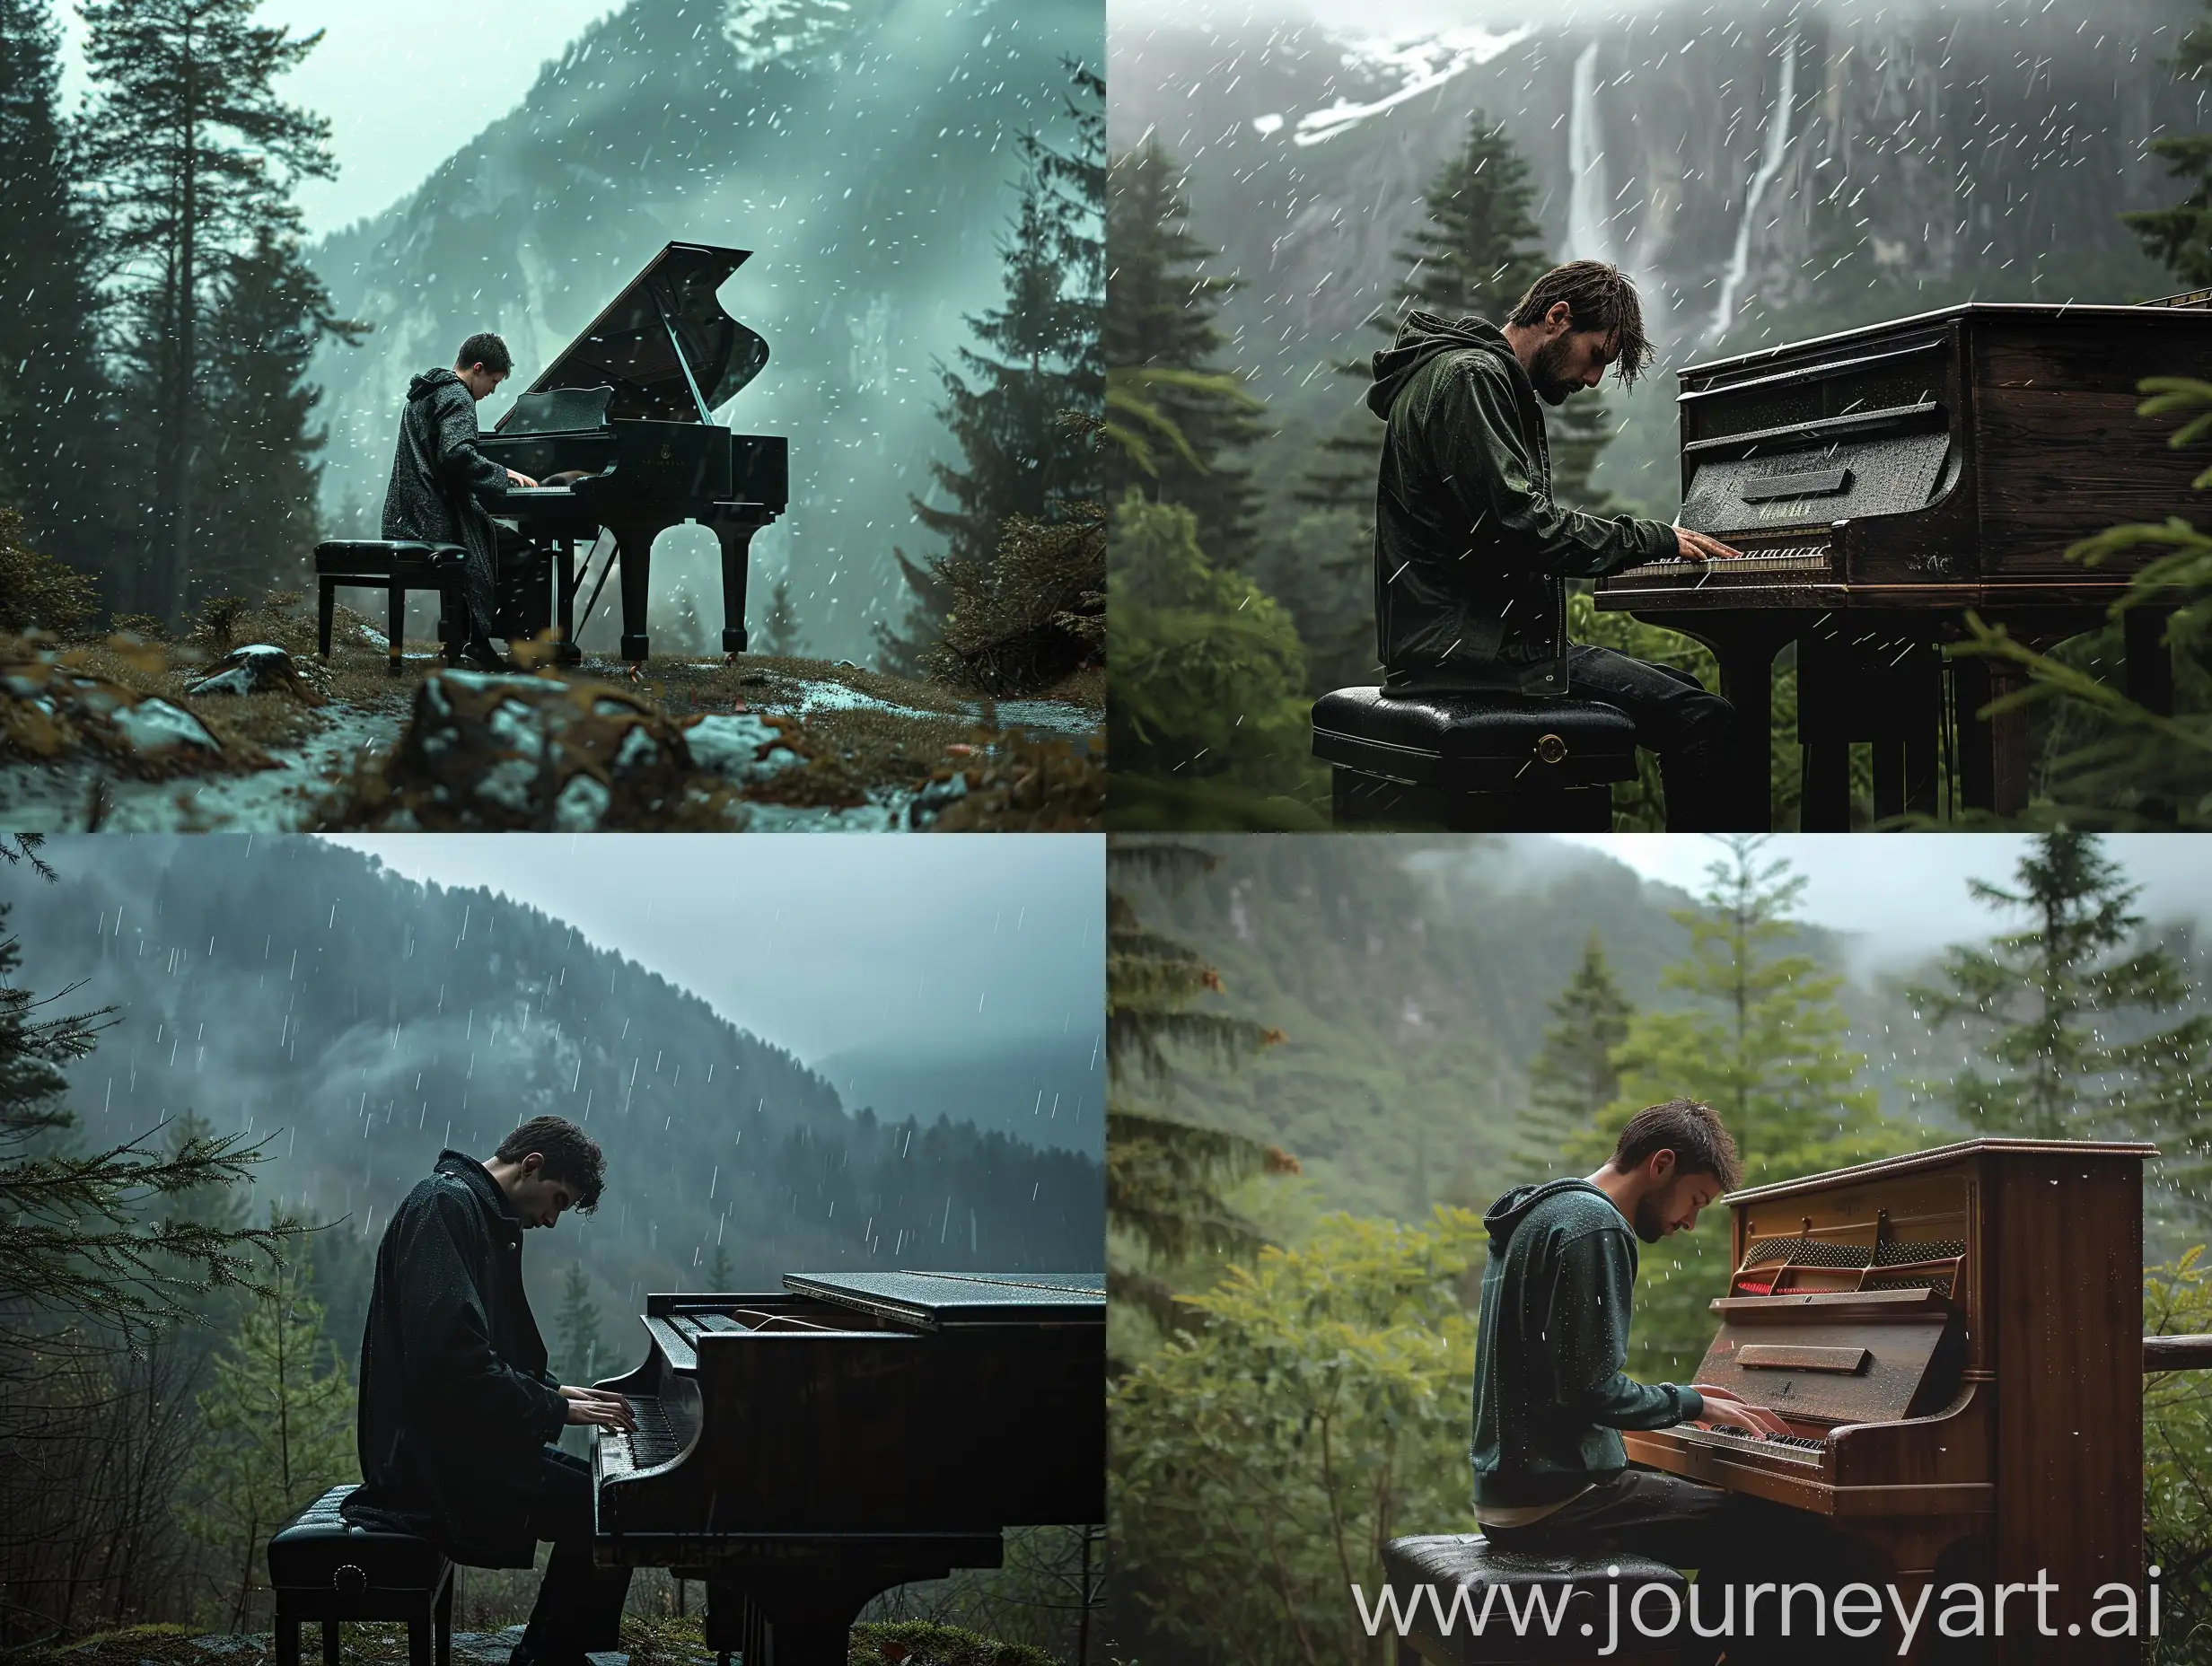 Melancholic-Musician-Piano-Performance-Amidst-Forested-Mountains-in-Drizzling-Rain